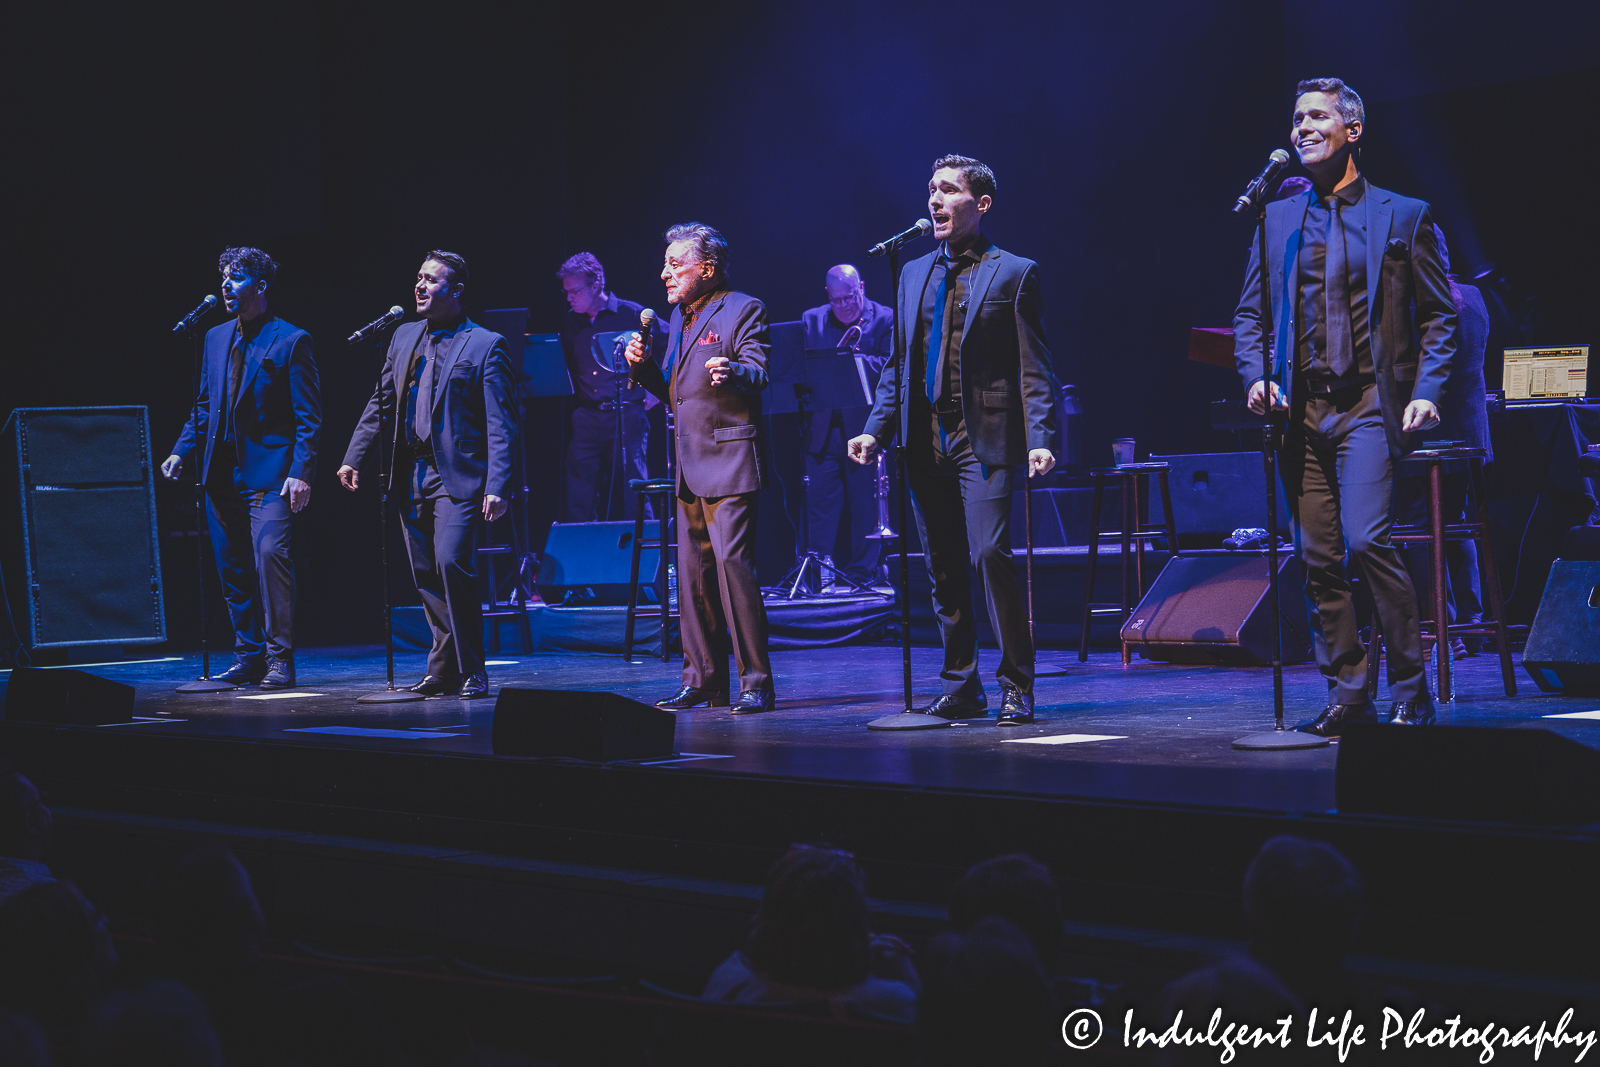 Frankie Valli and the Four Seasons performing live in concert at the Kauffman Center in downtown Kansas City, MO on June 4, 2022.